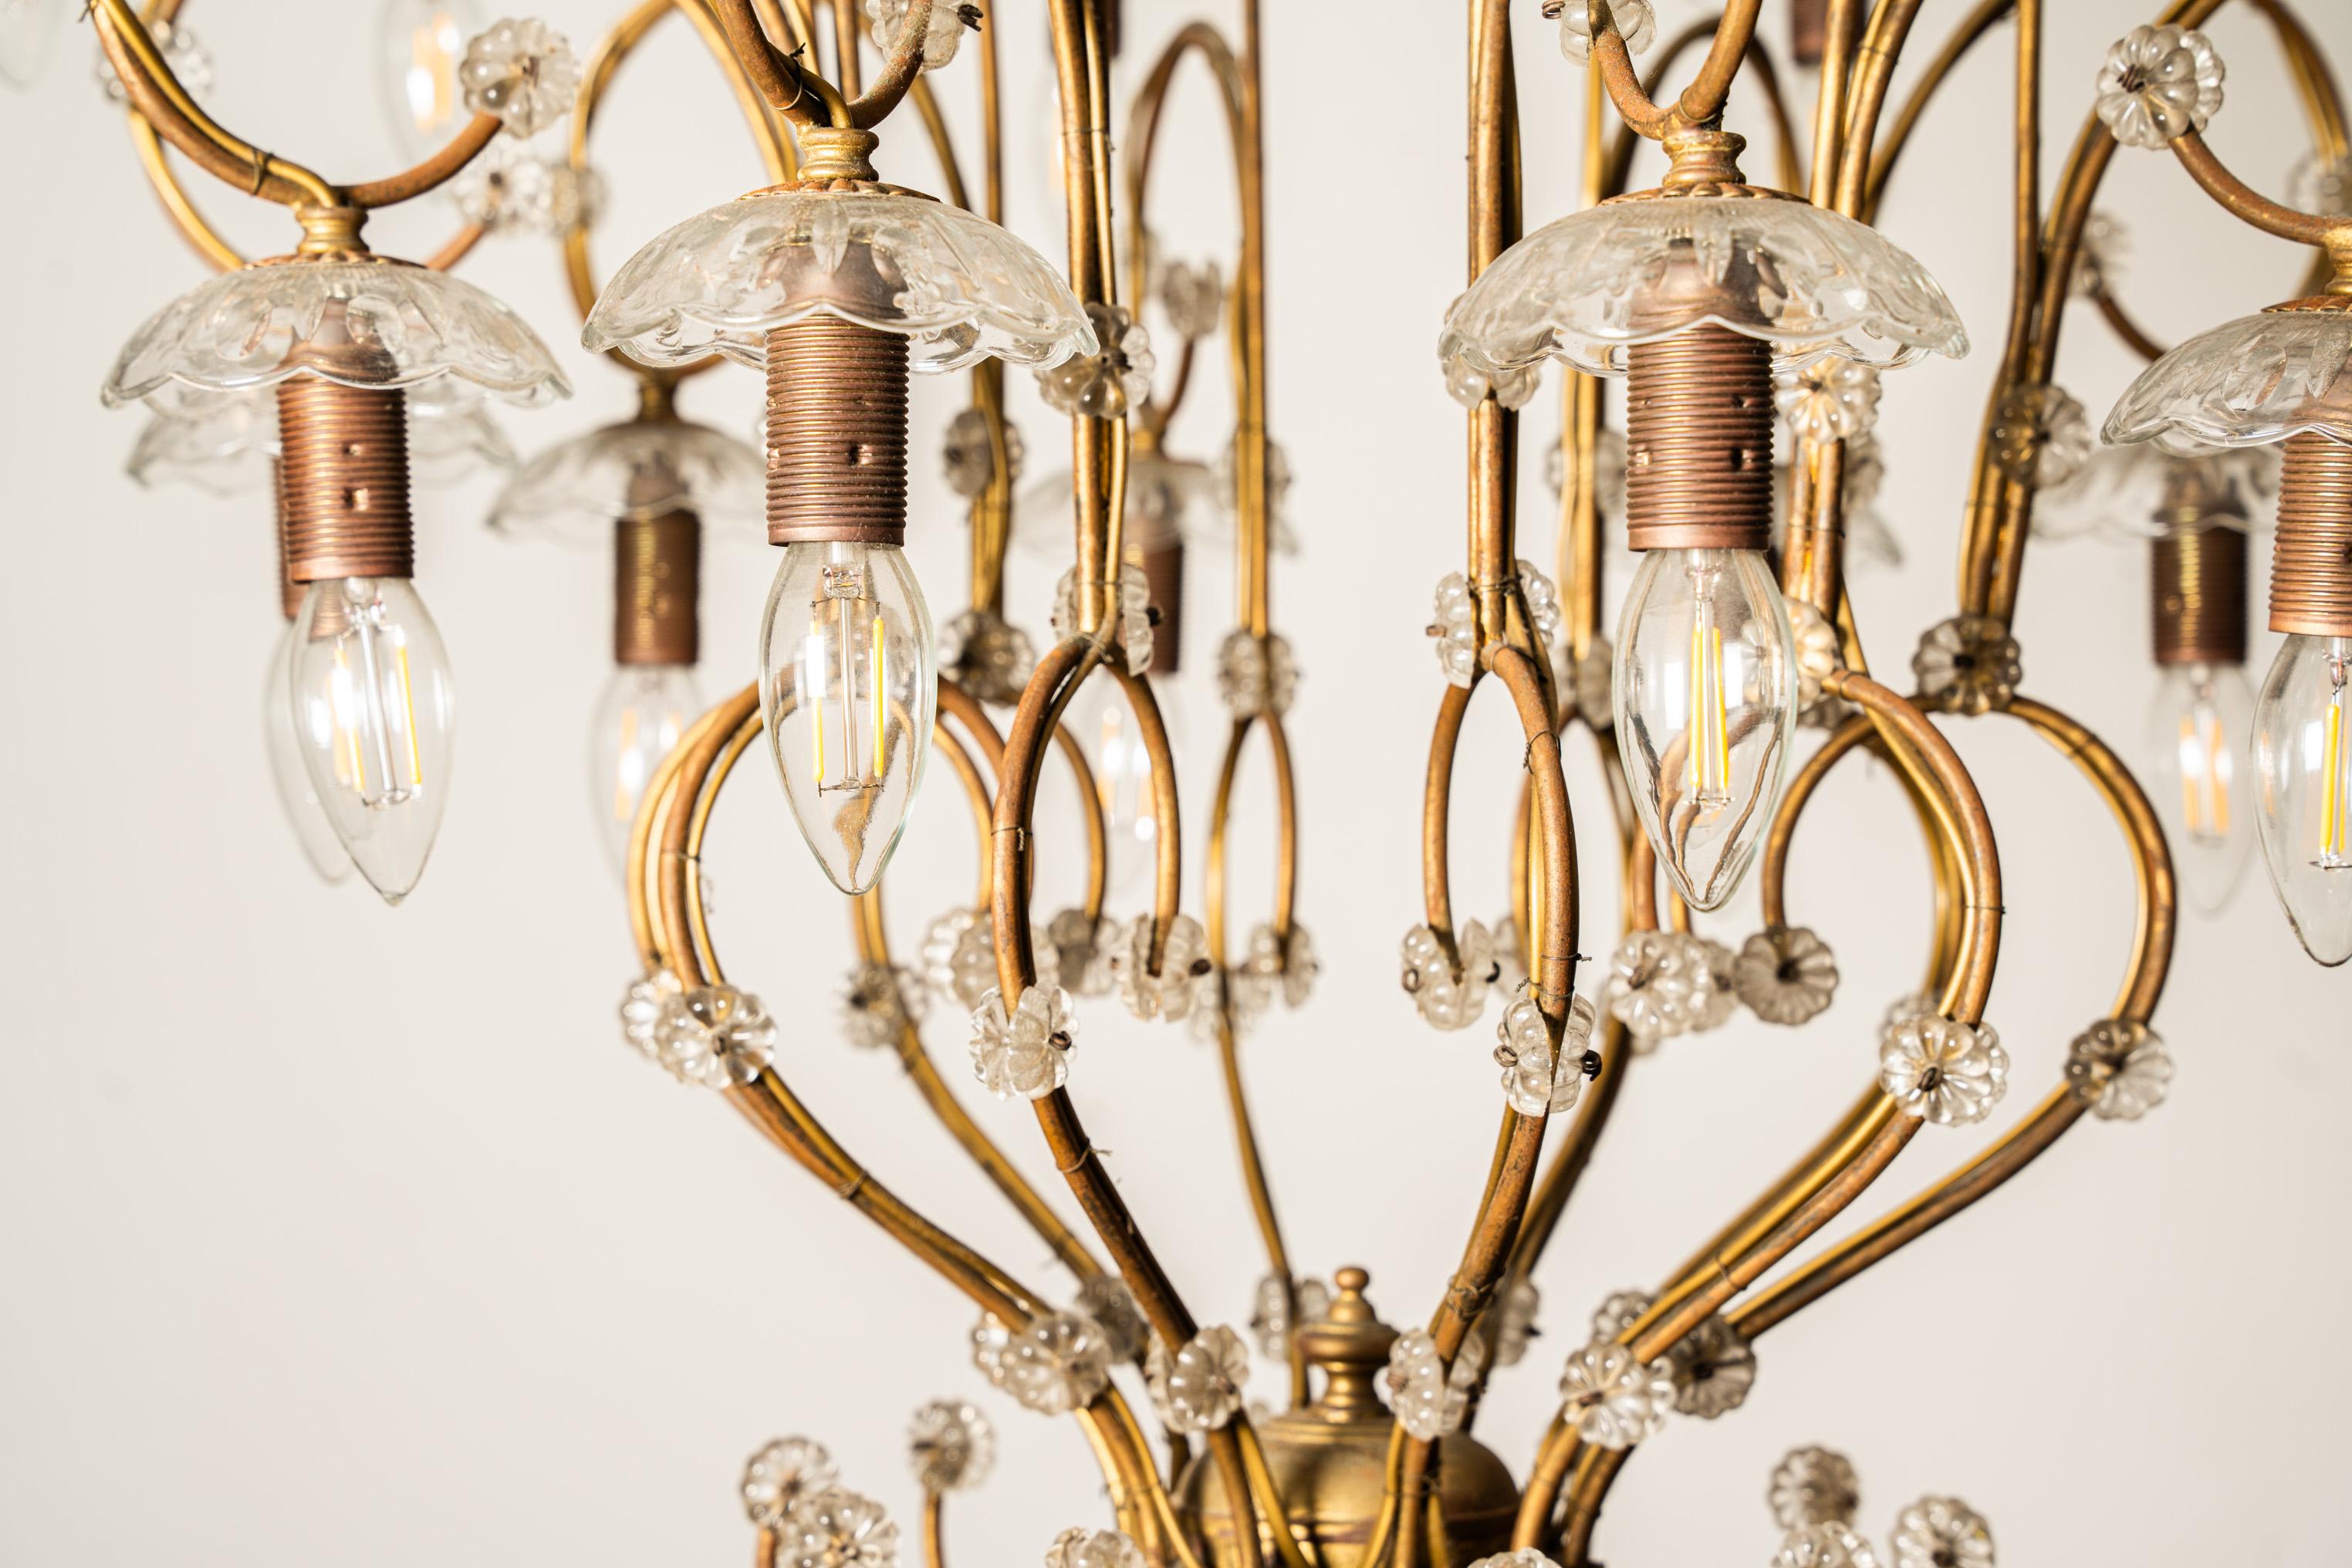 Large 20-light brass and glass chandelier chandelier  In Good Condition For Sale In Santa Margherita Ligure, IT